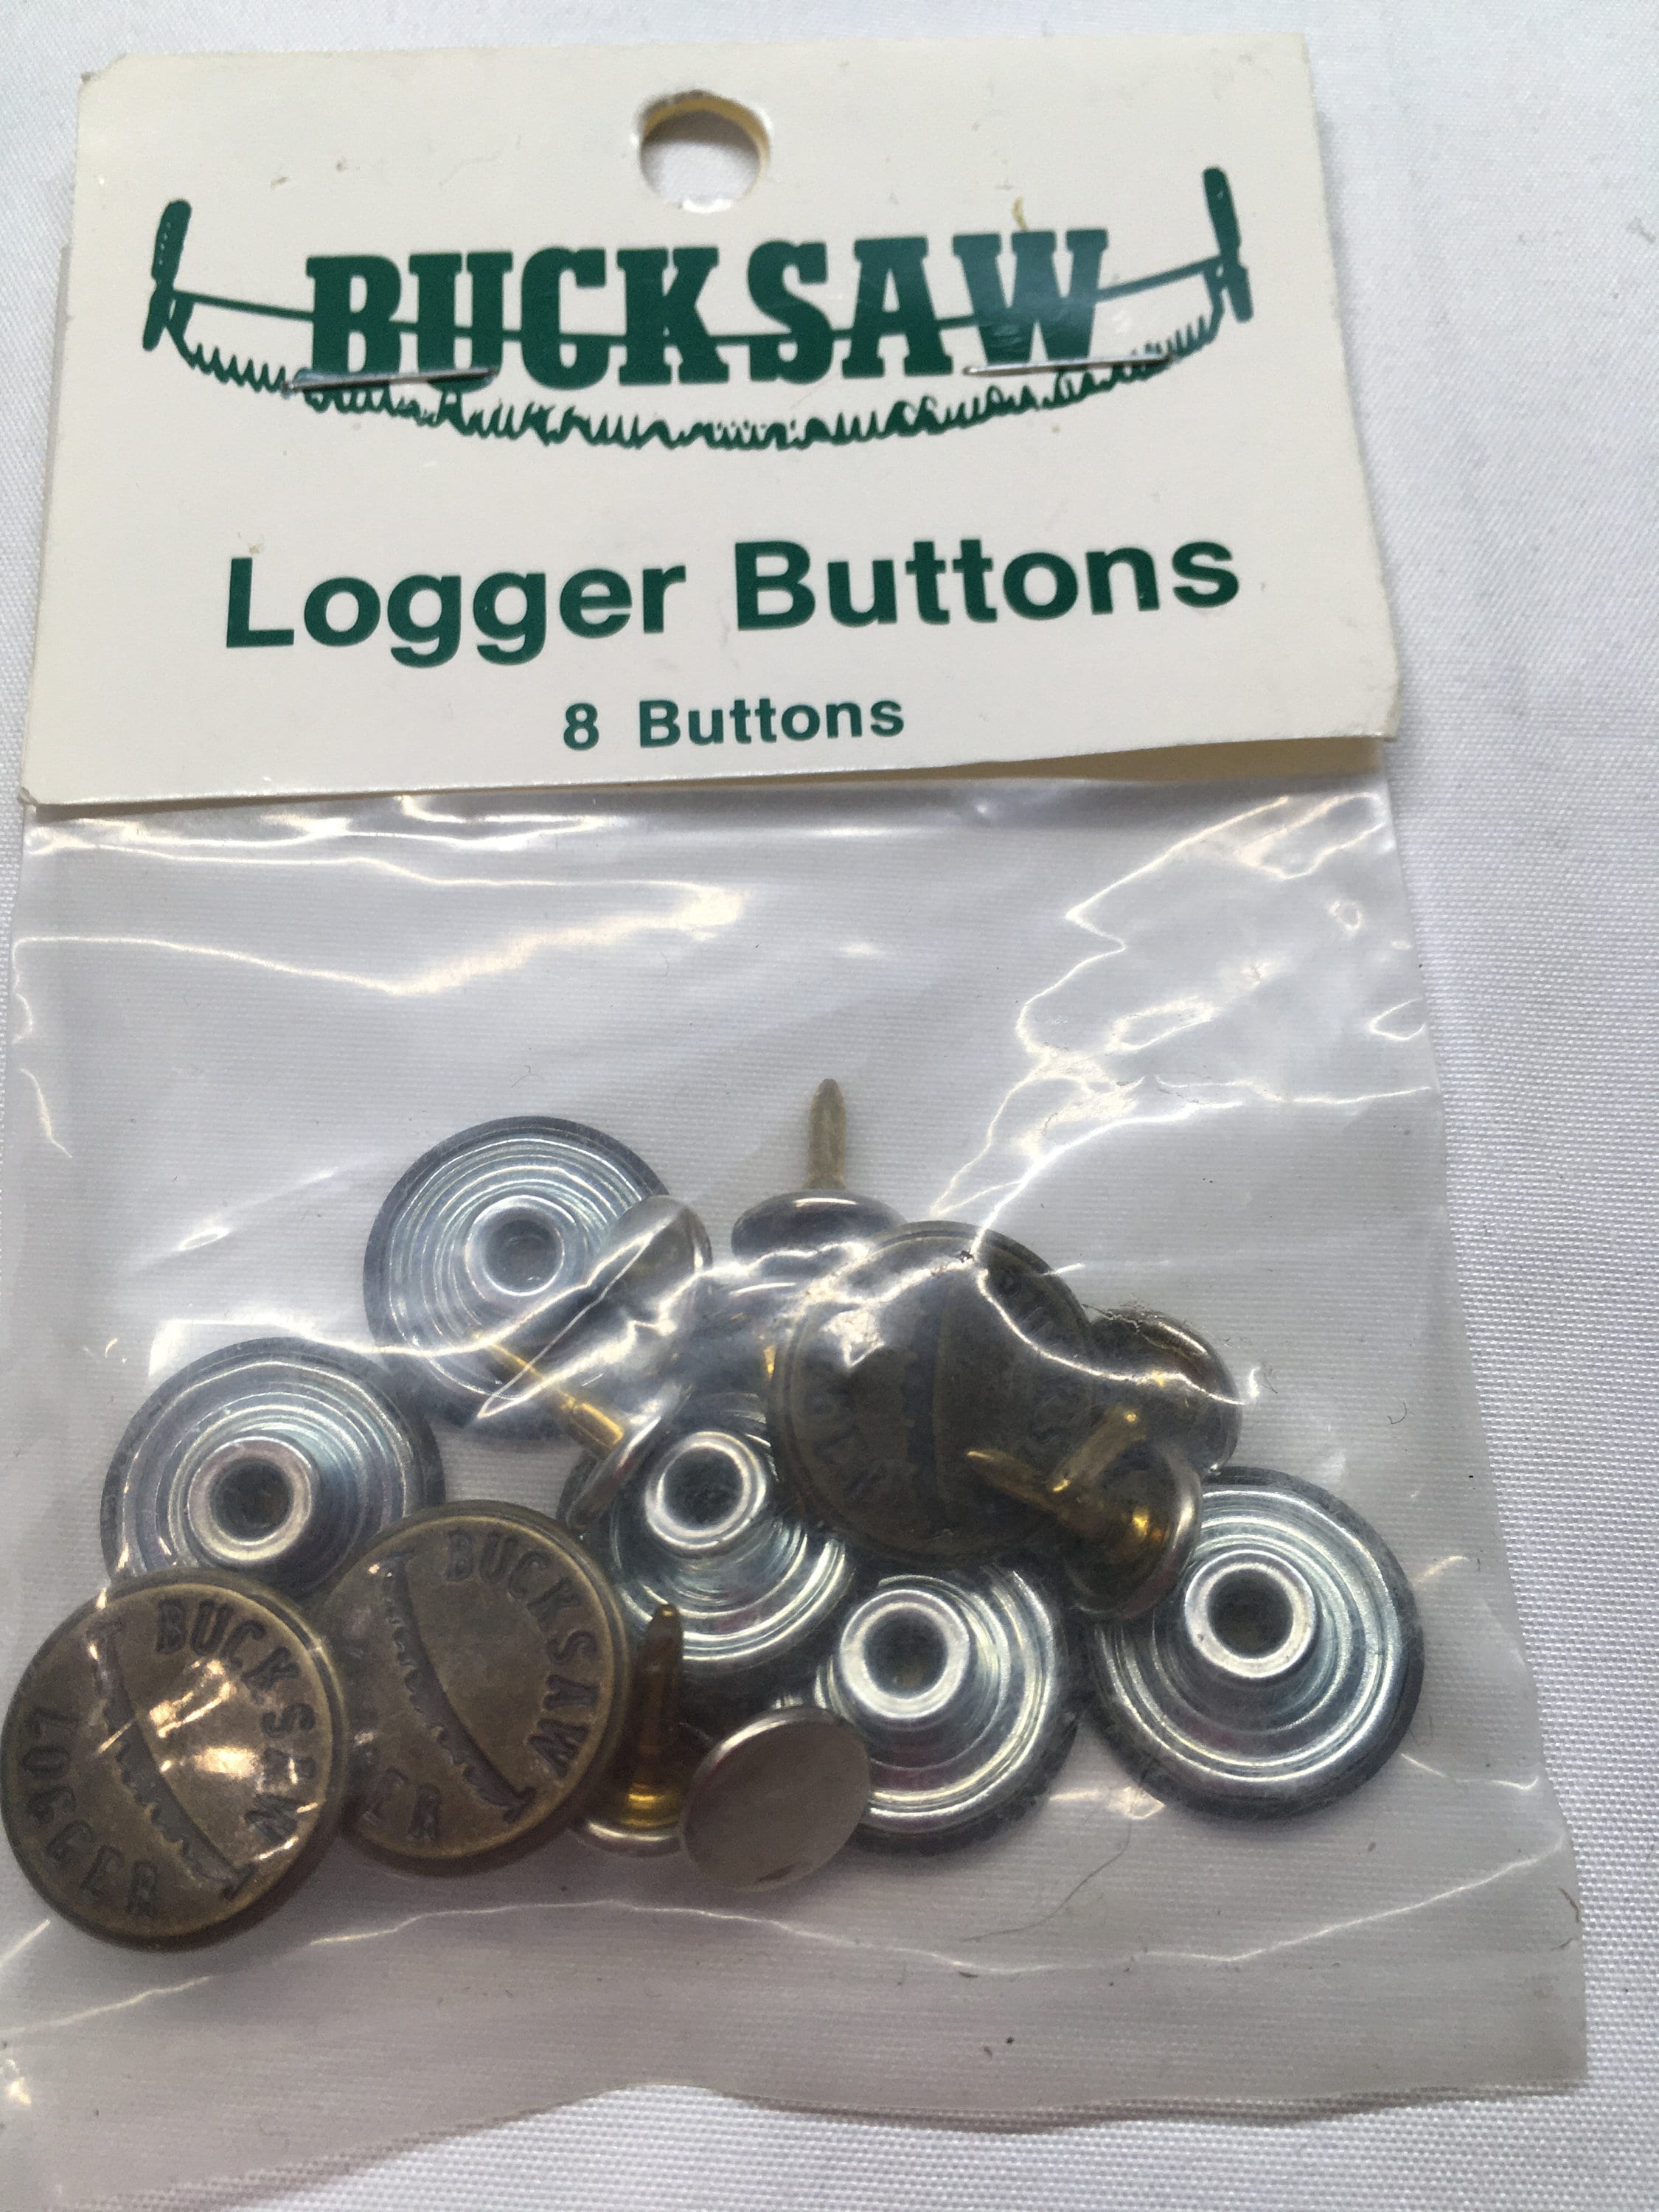 15 Tack Buttons, Copper Tone Metal, 17mm, Star Bullseye, Jean Jacket Type, No  Sew, Suspender Buttons 